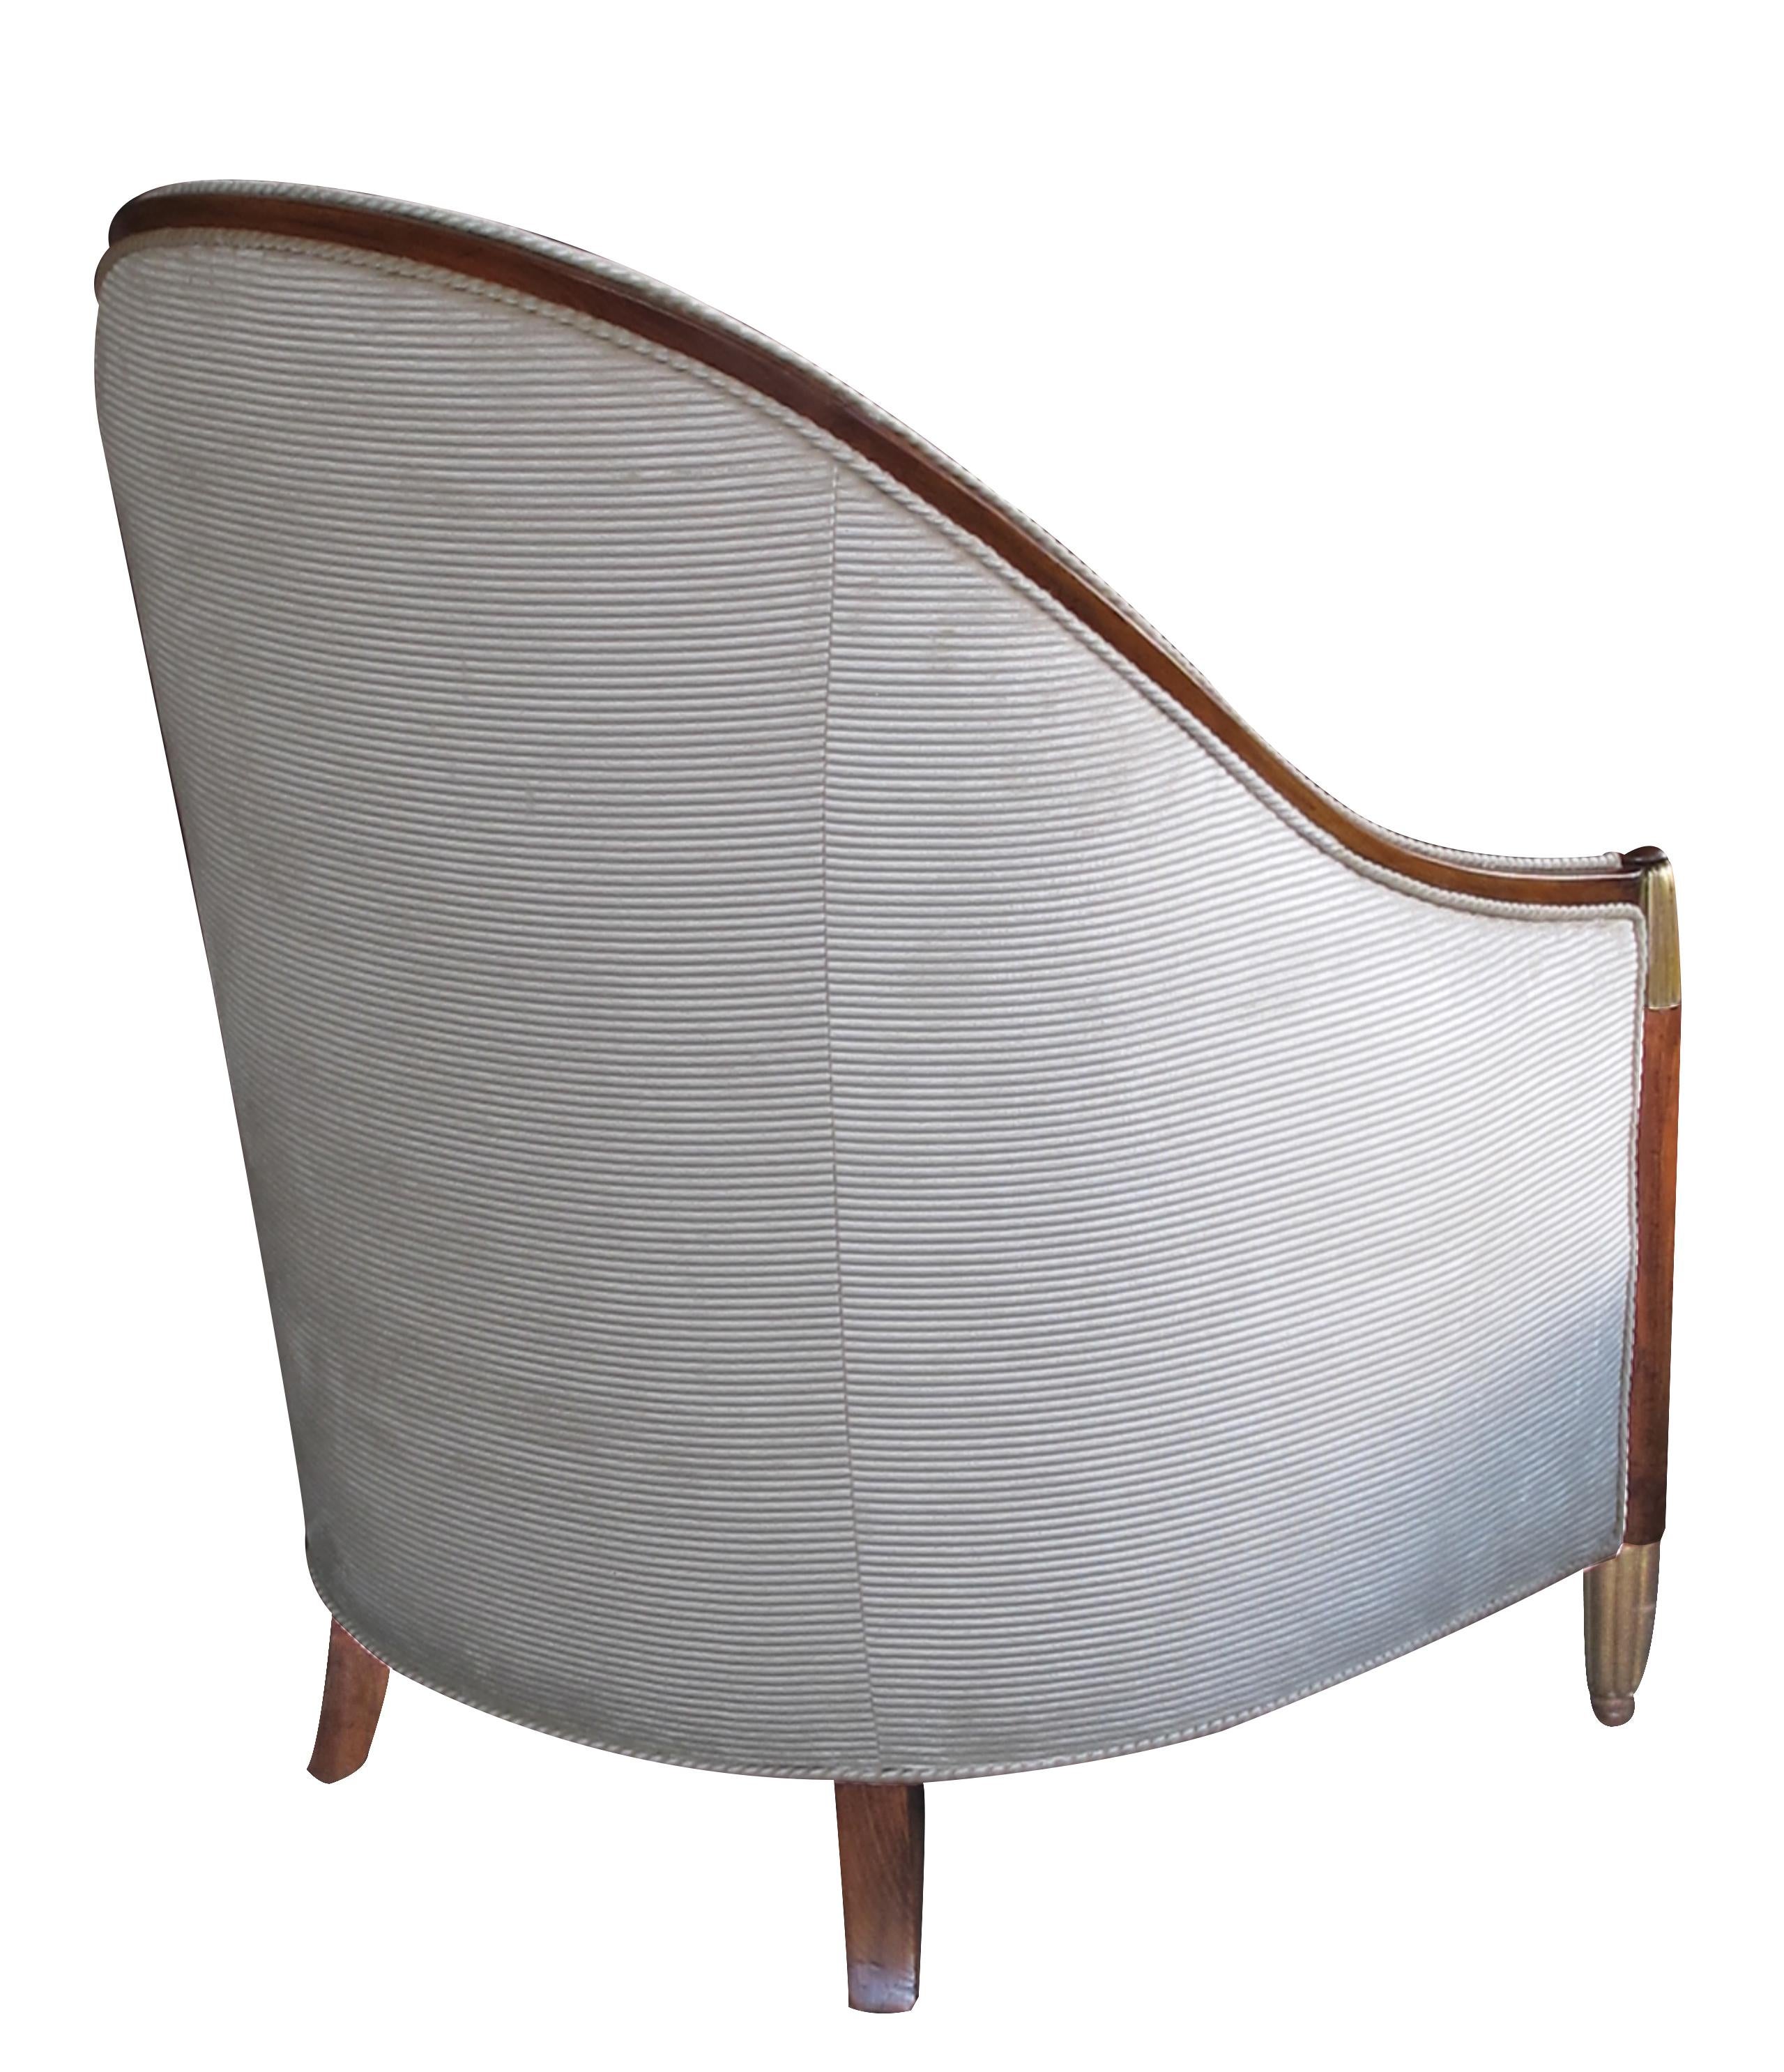 Mid-20th Century Elegant French Art Deco Bergere with Sweeping Back, in the Style of Paul Follot